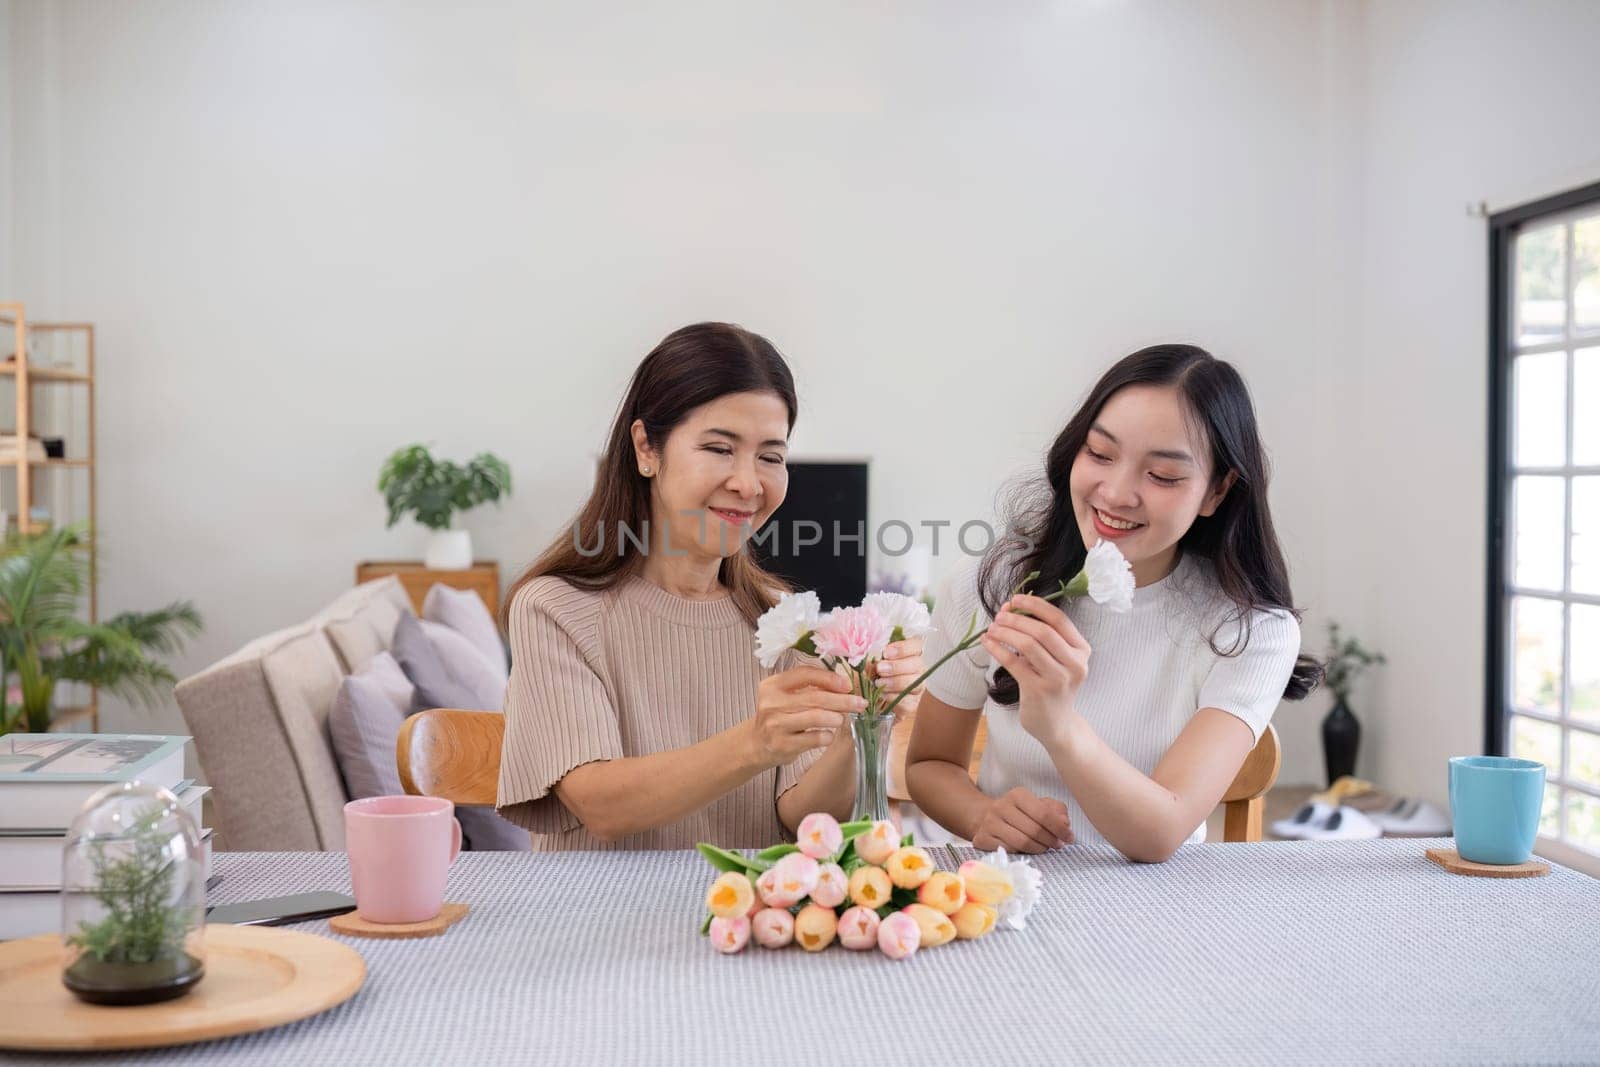 Middle-aged daughter happily arranges flowers with her mother at home Free time activities that are done together as a family by wichayada